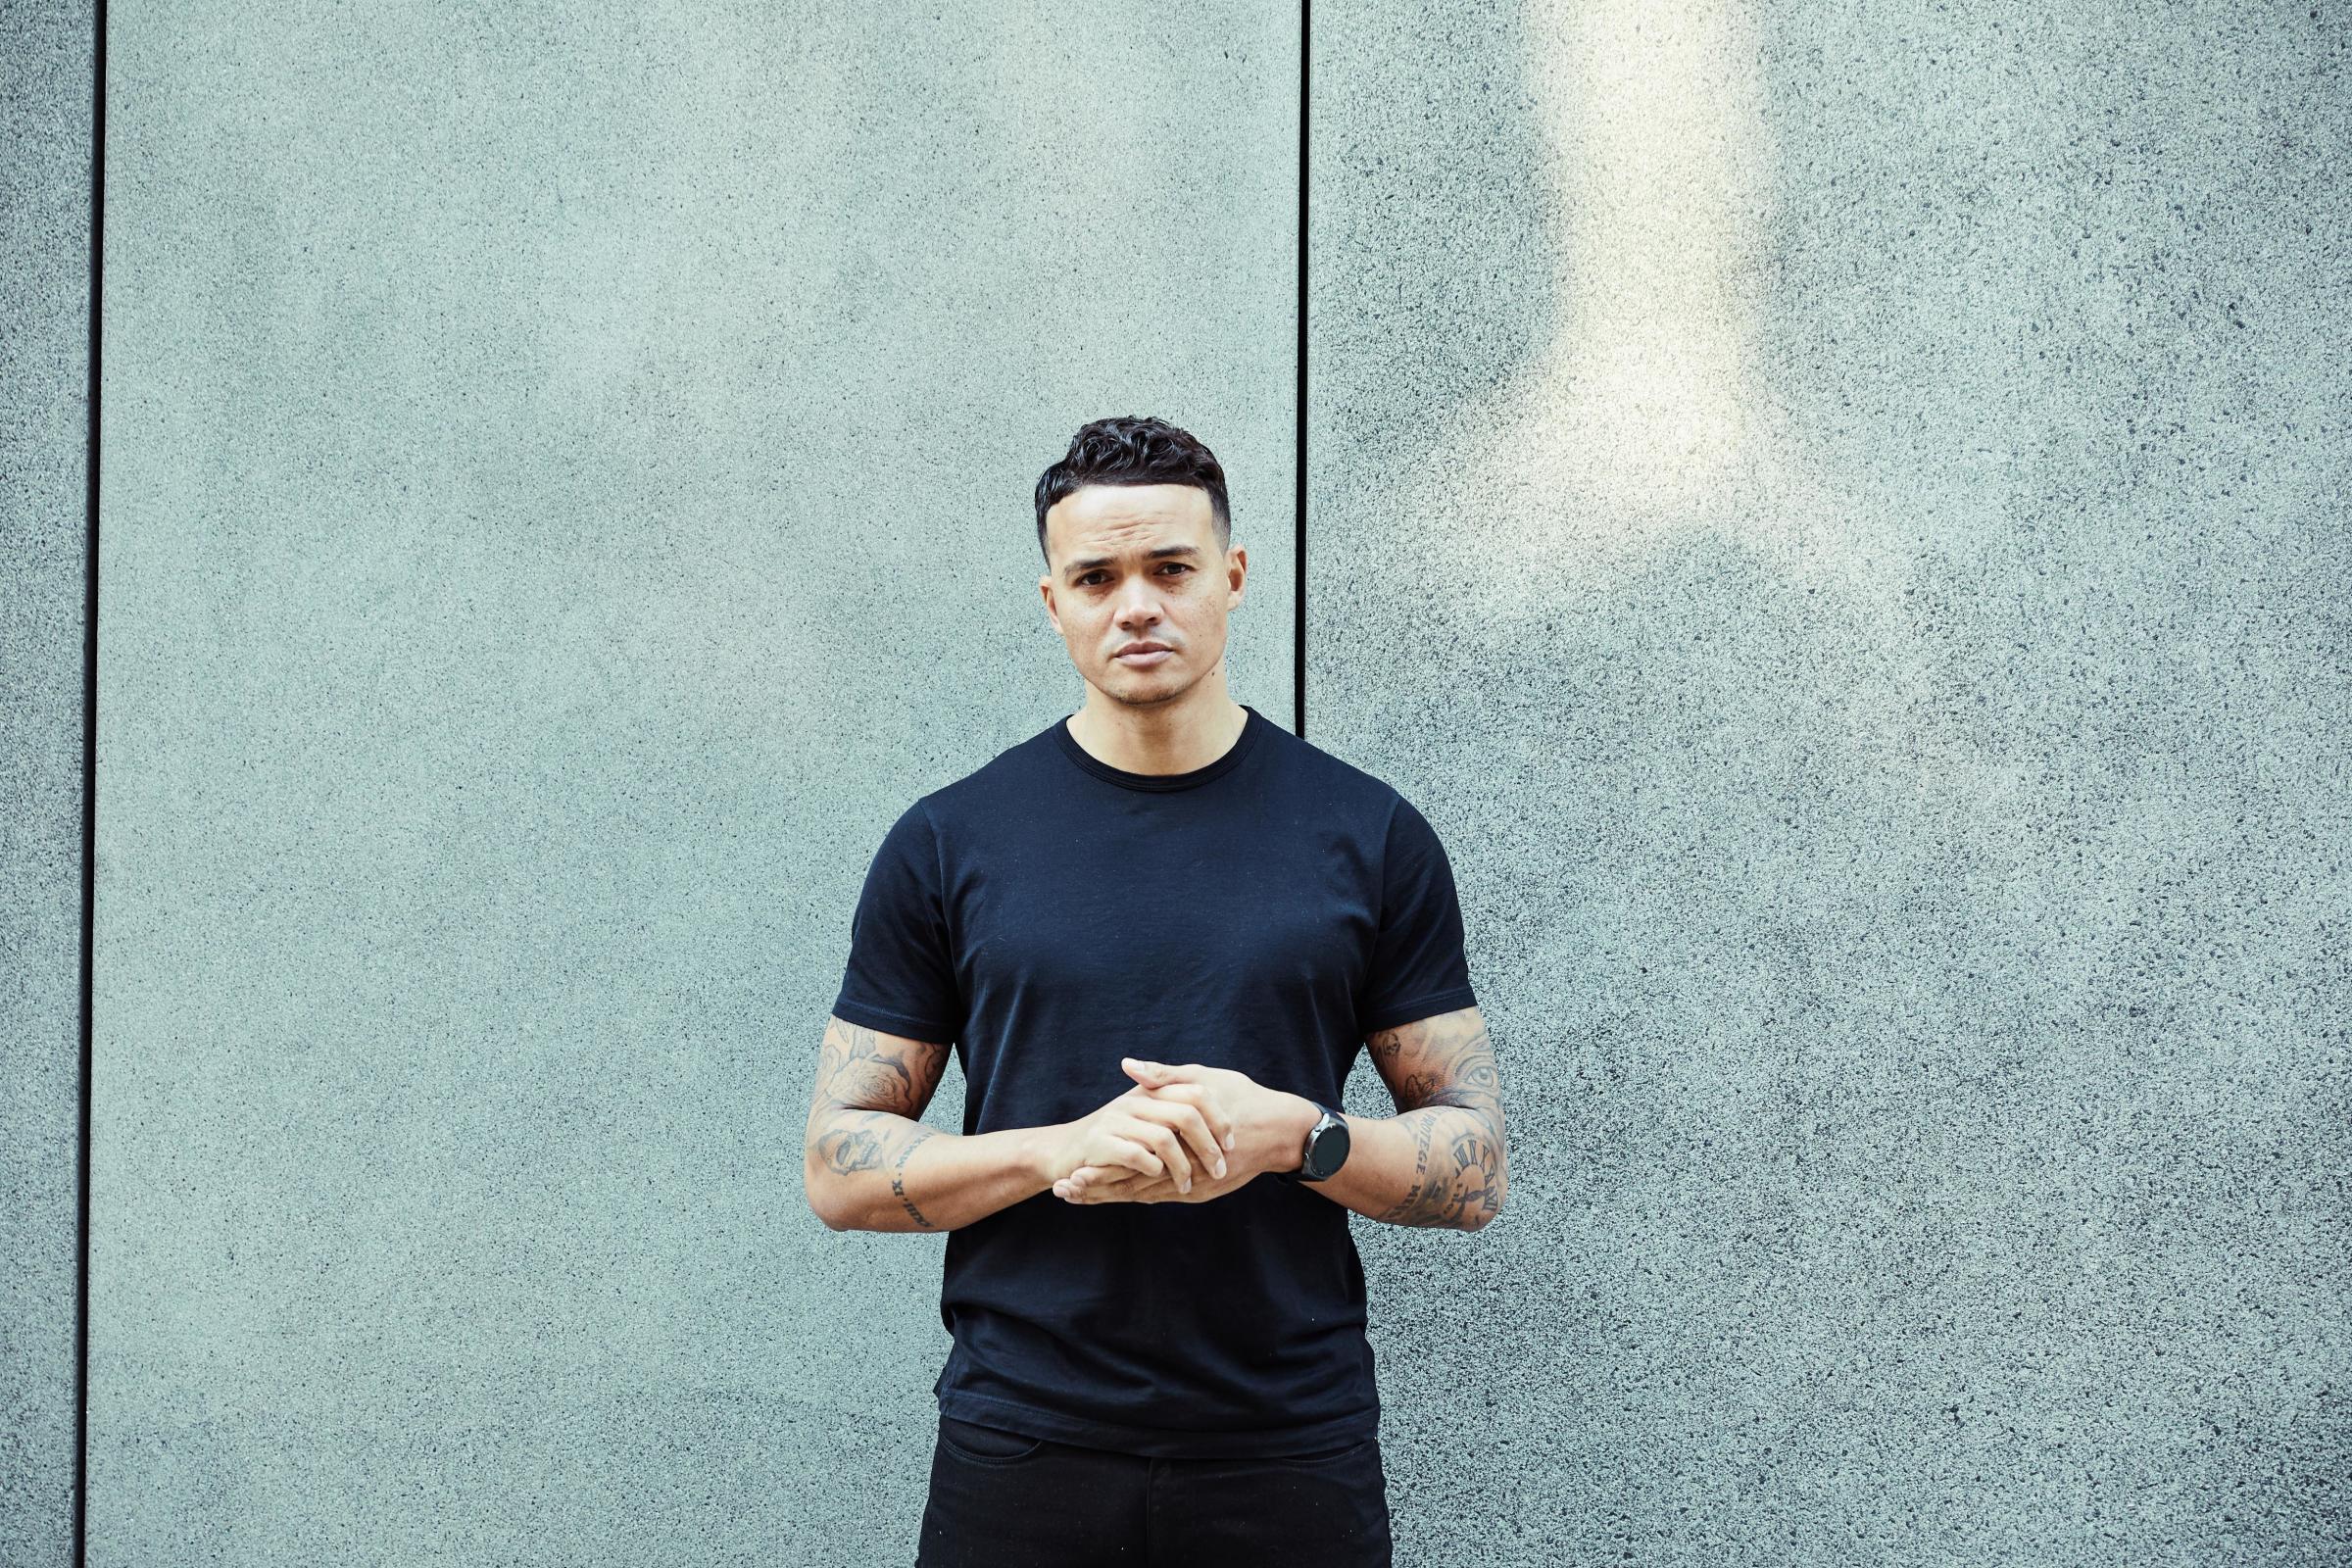 Jermaine Jenas: Stop And Search